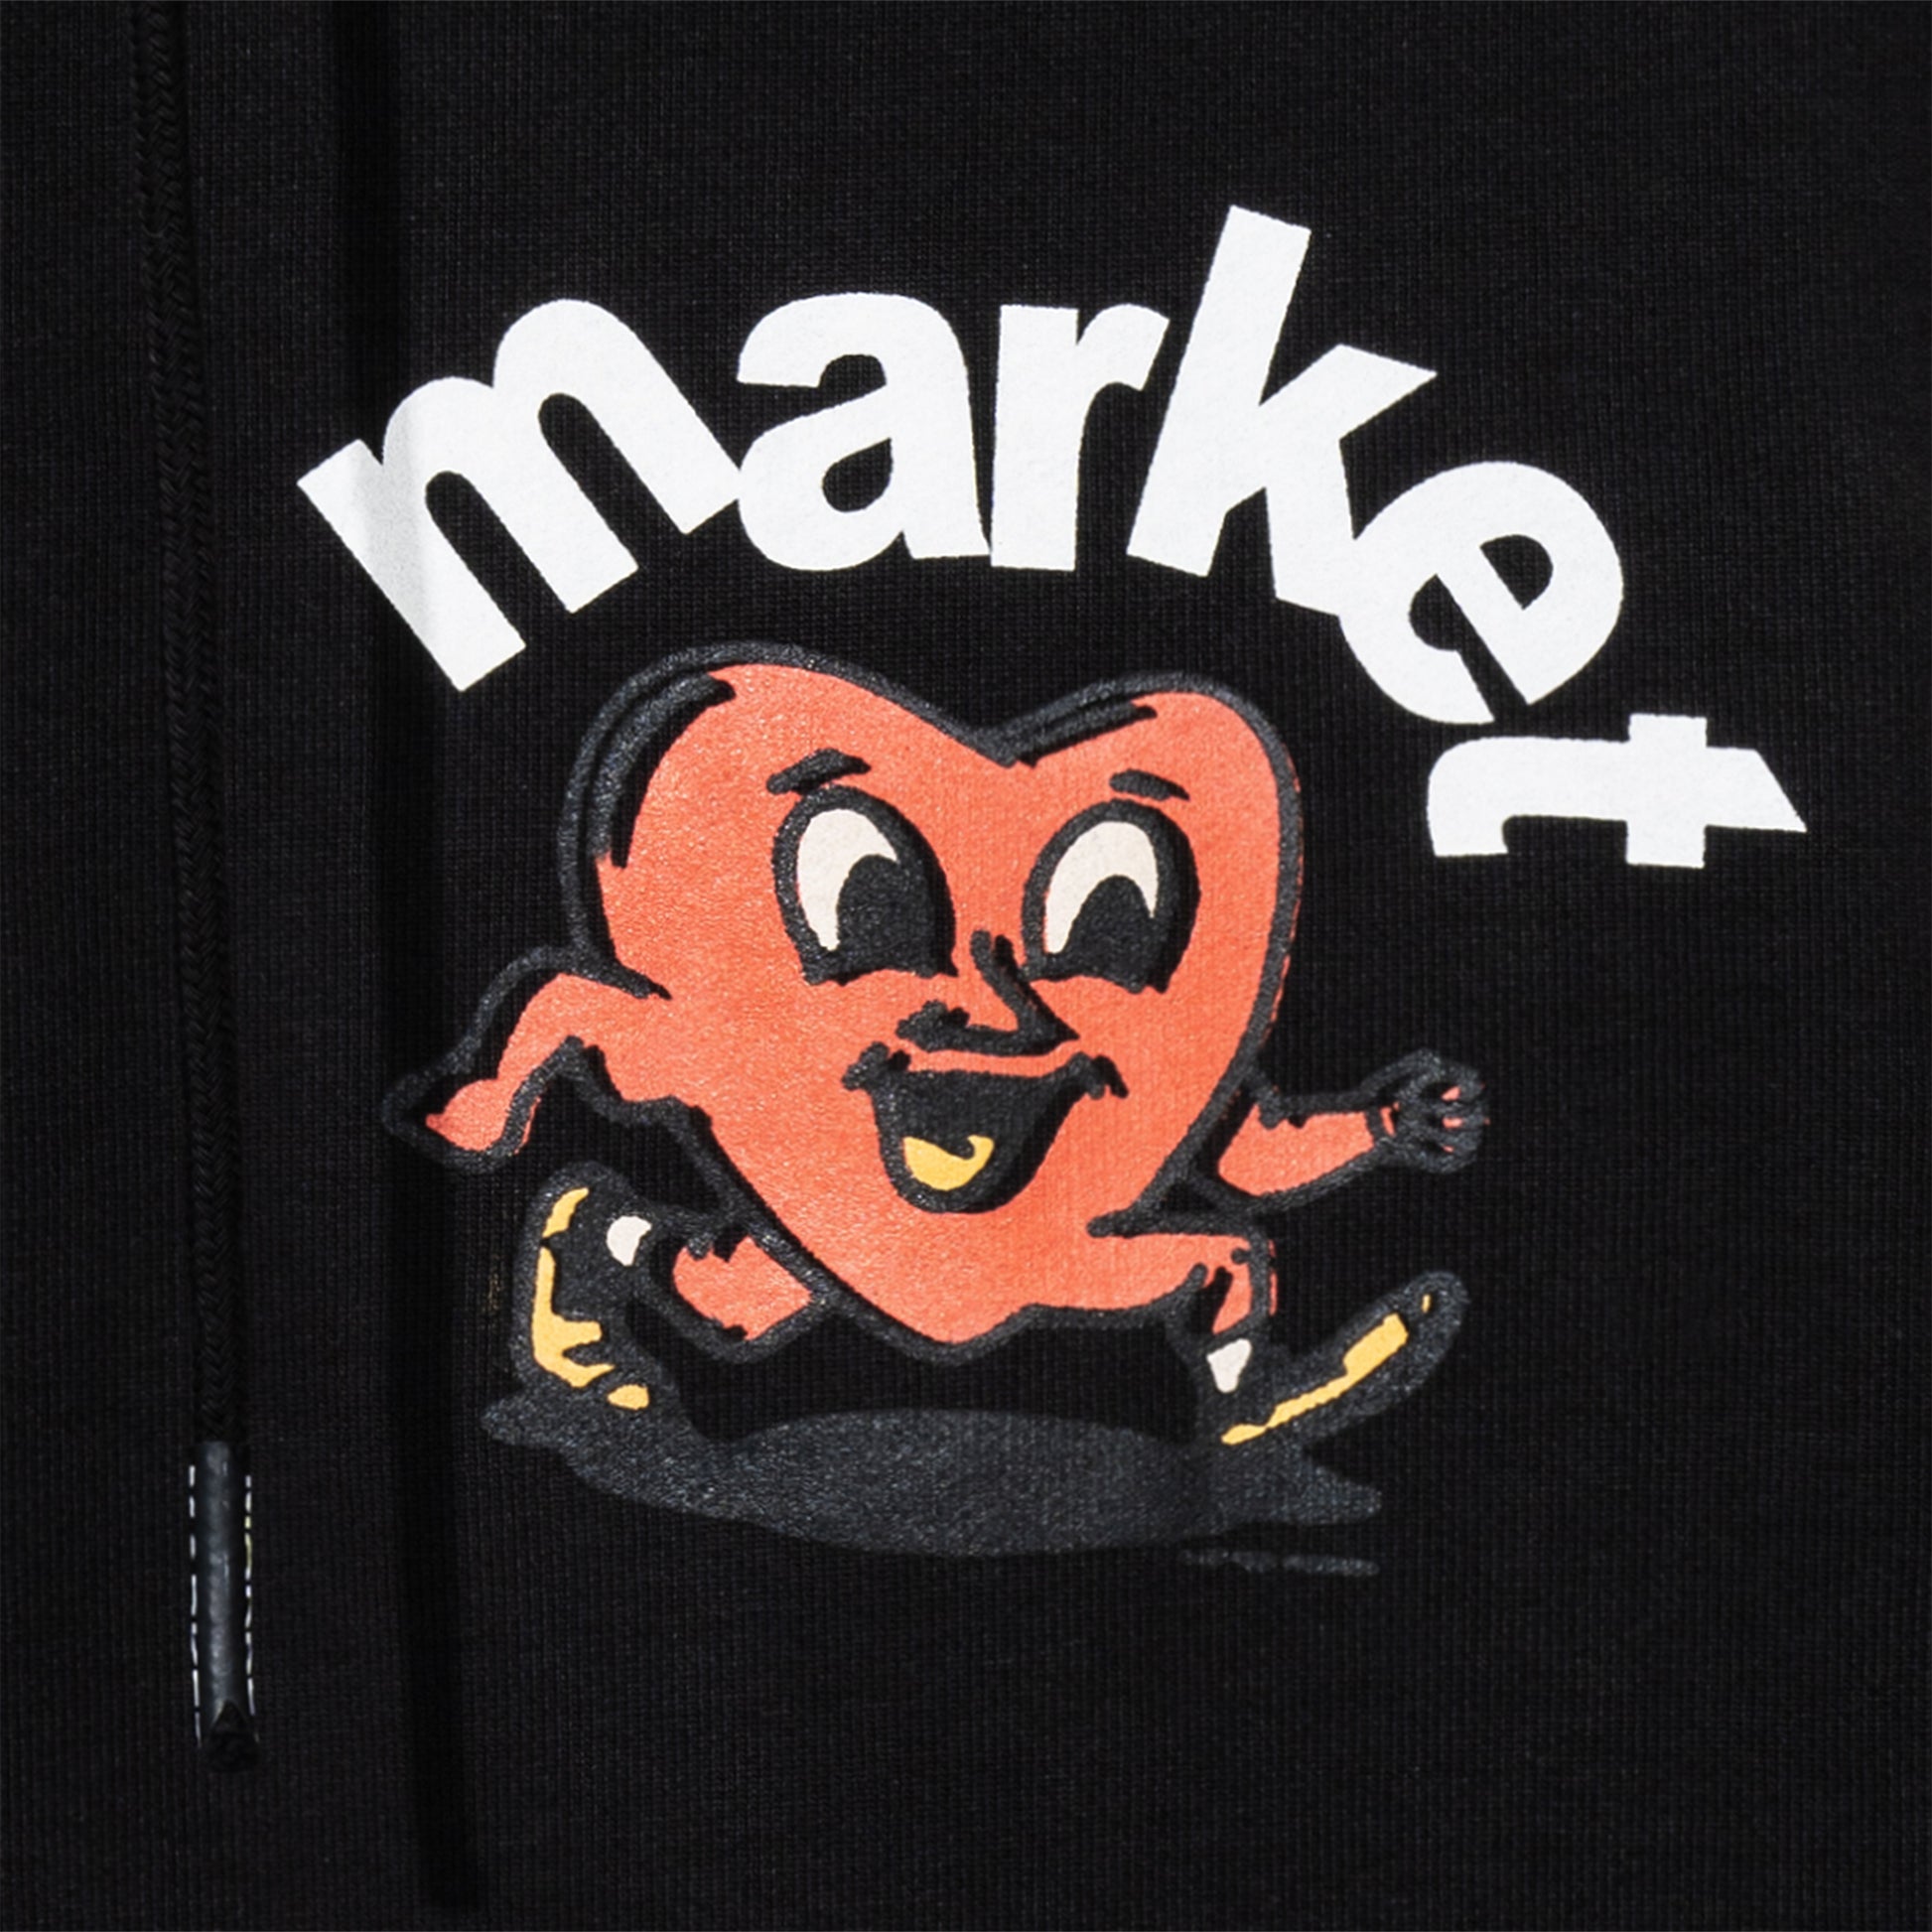 MARKET clothing brand FRAGILE HOODIE. Find more graphic tees, hats and more at MarketStudios.com. Formally Chinatown Market.